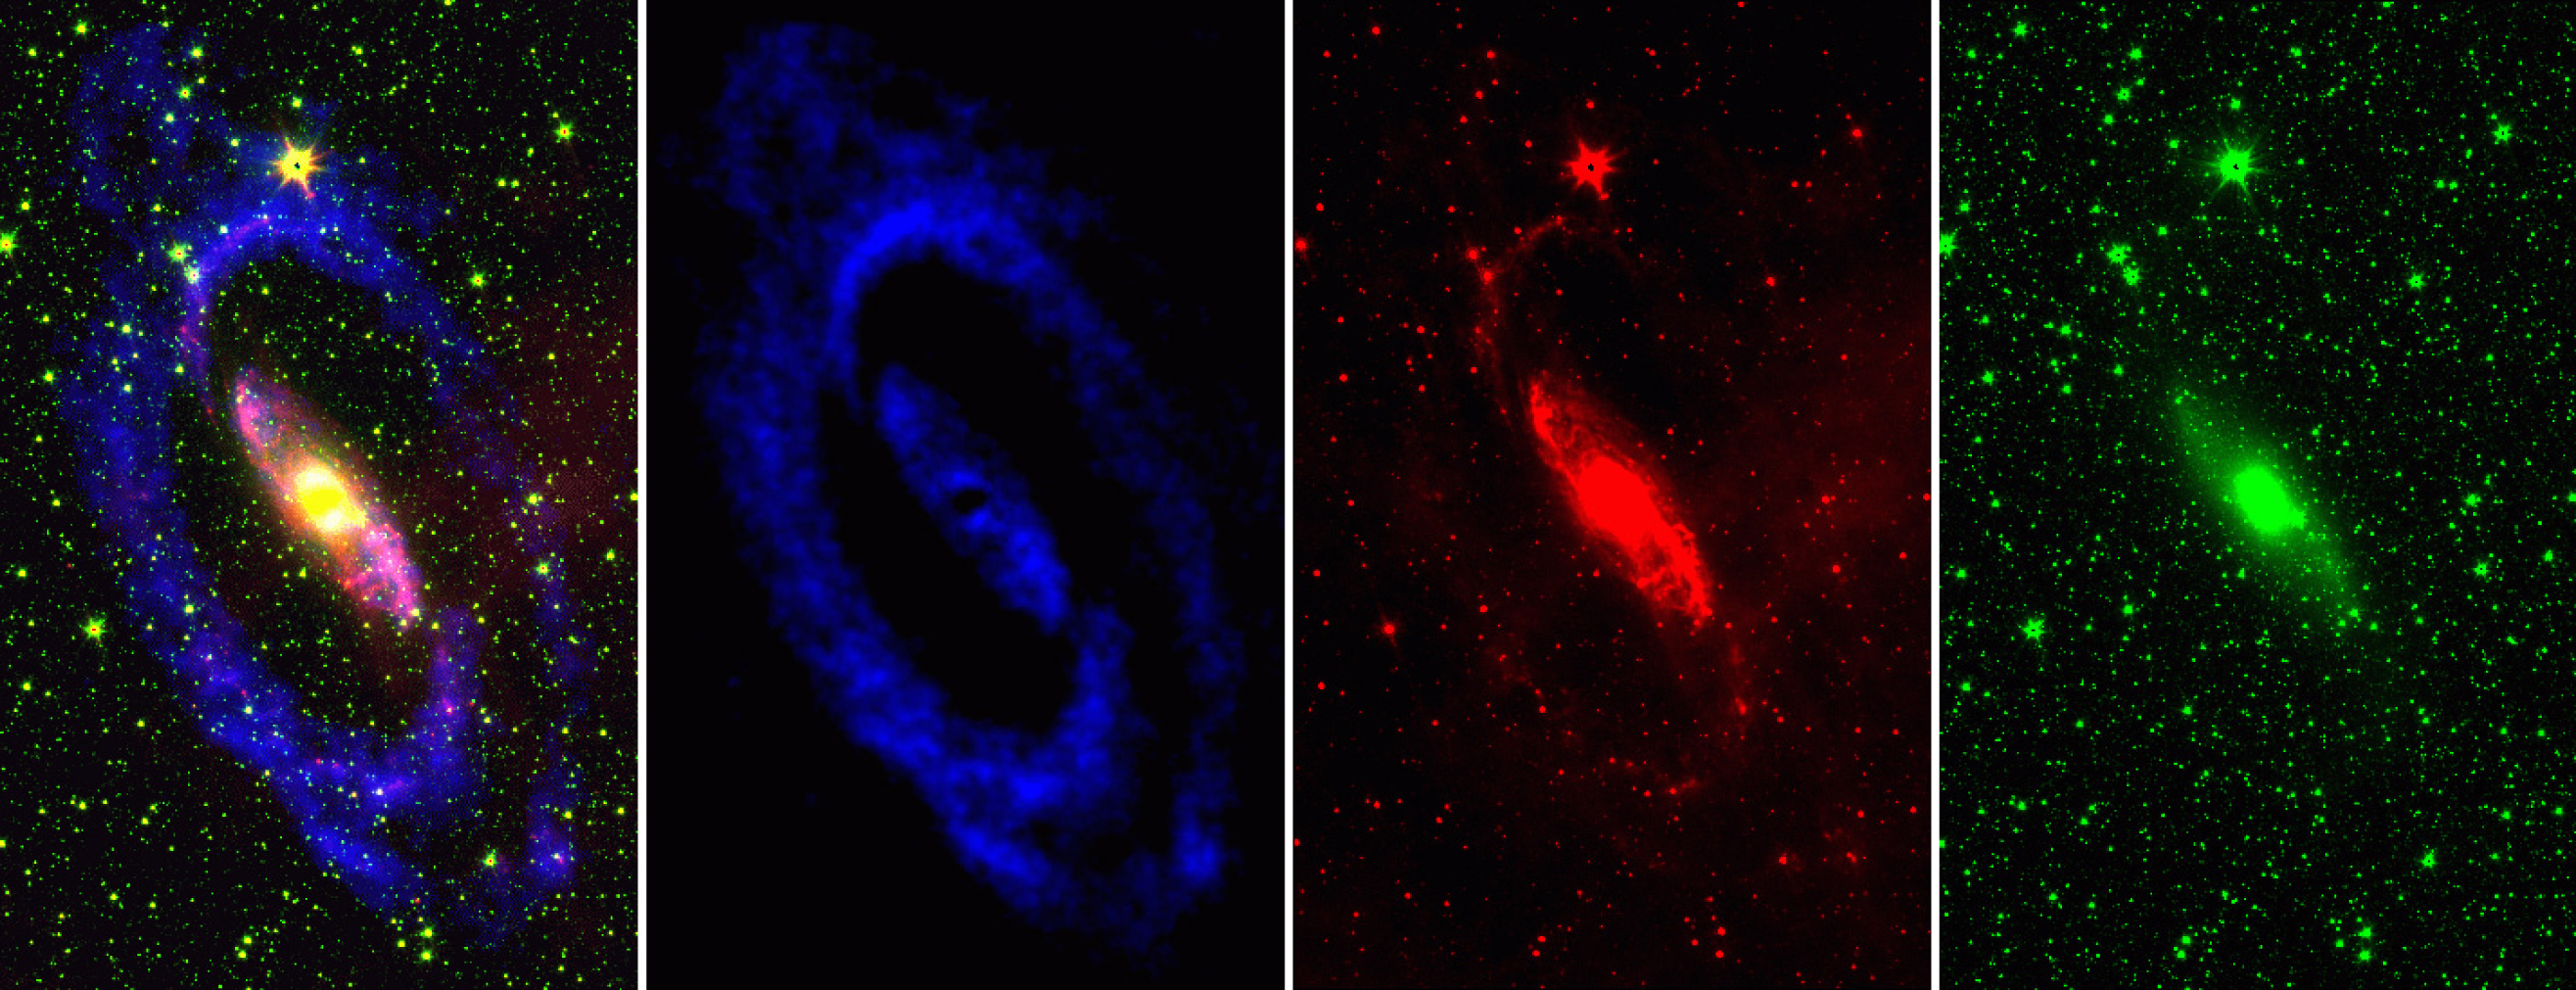 Four maps showing the galaxy Circinus at different wavelengths; on the far left is a multi-coloured swirling image on a black background; second from left is a blue swirl on a black background; second from right is a red swirl on a black background; on the far right is a green swirl on a black background.